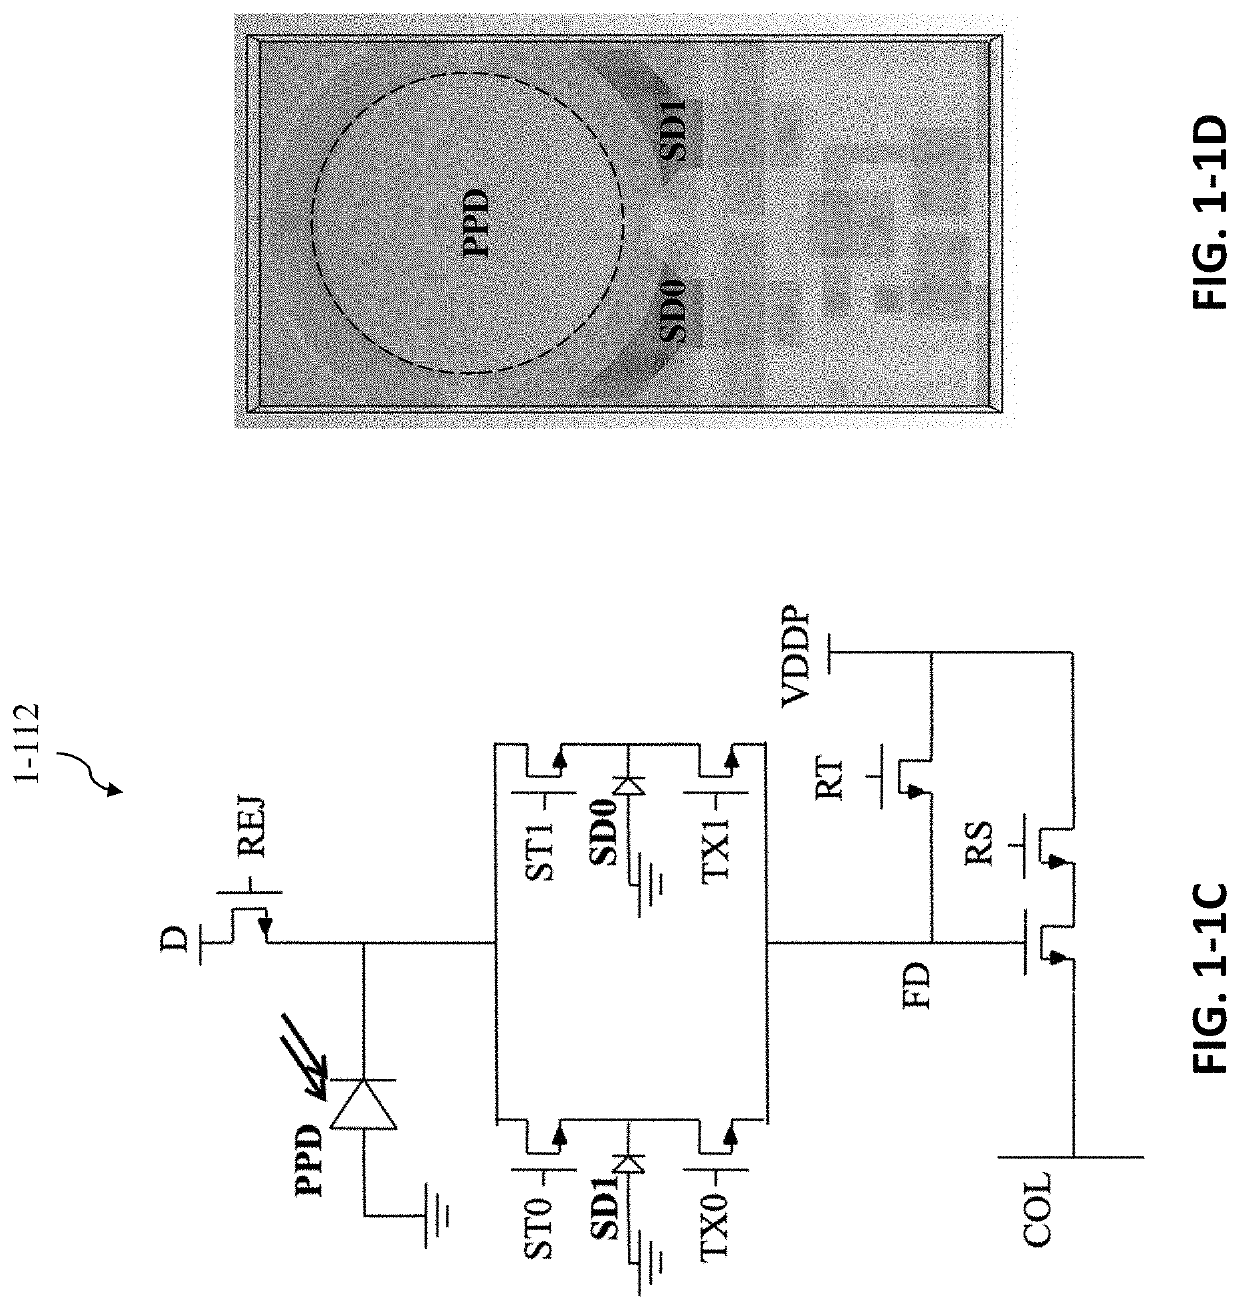 Optical and electrical secondary path rejection